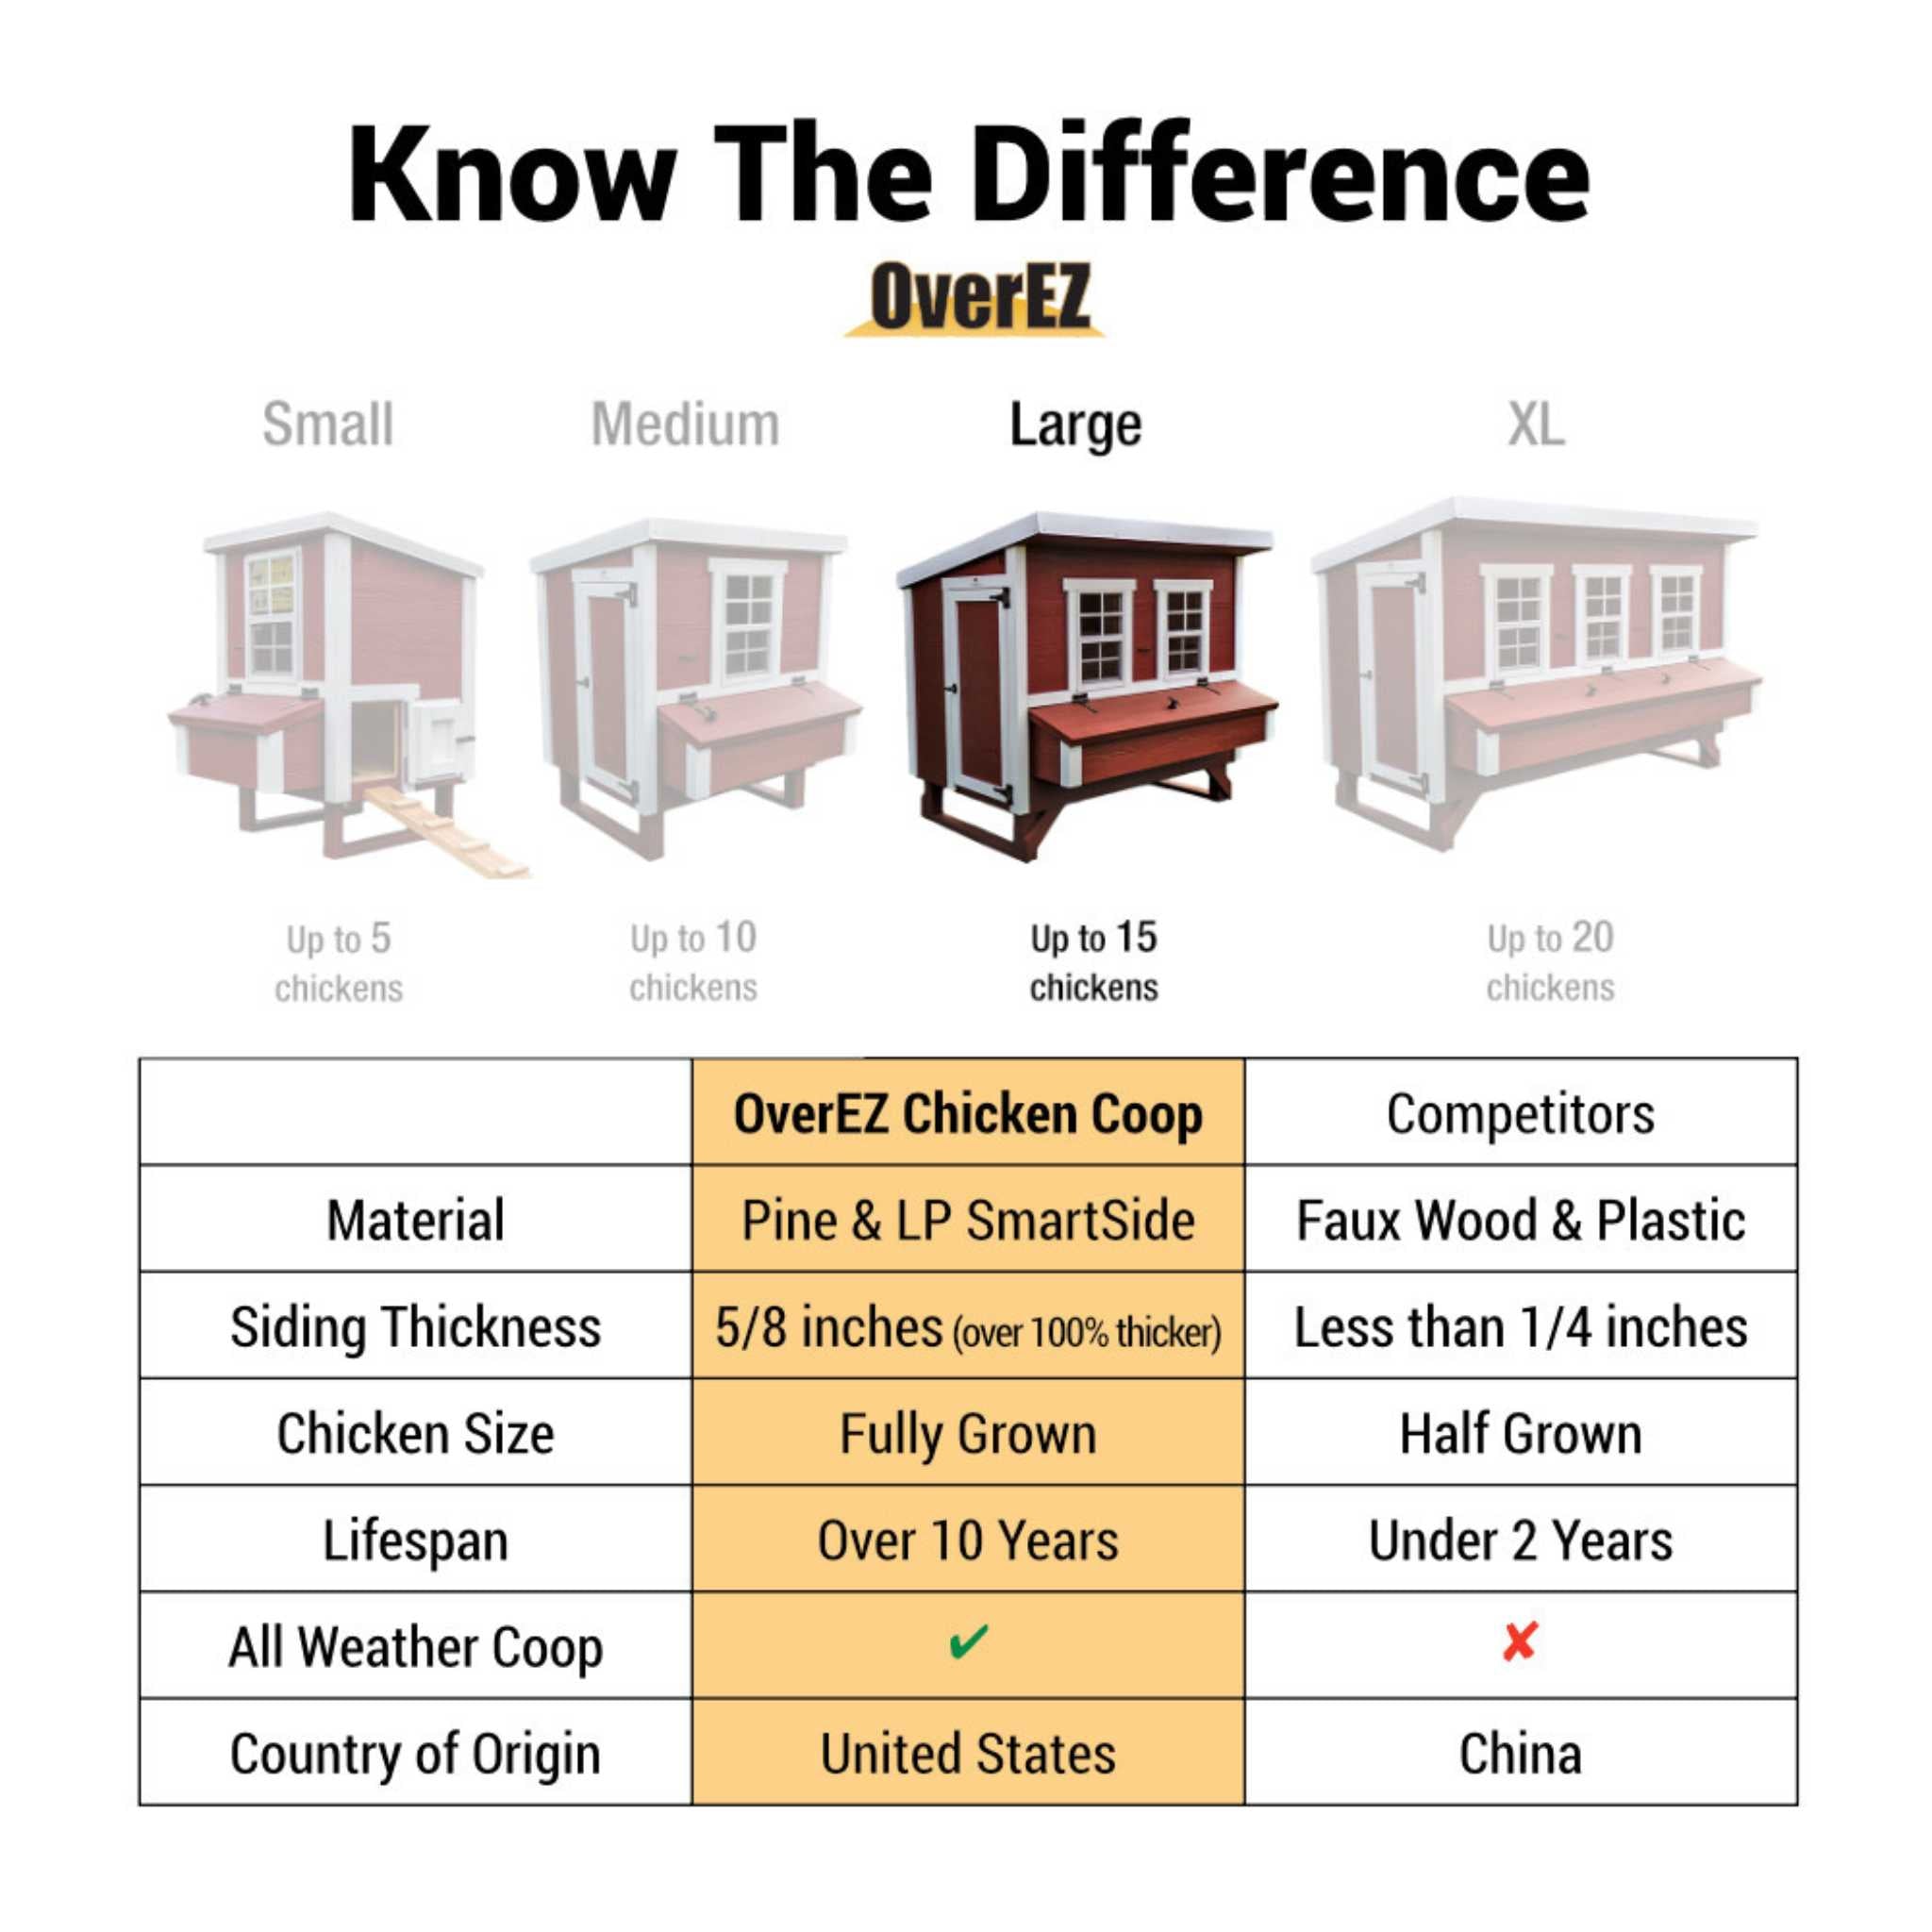 Hatching Time OverEZ. Large chicken coop is highlighted in infographic. Large chicken coop is made with Pine and LP SmartSide material,  is 5/8 of an inch thick for fully grown chickens and can last over 10 years.